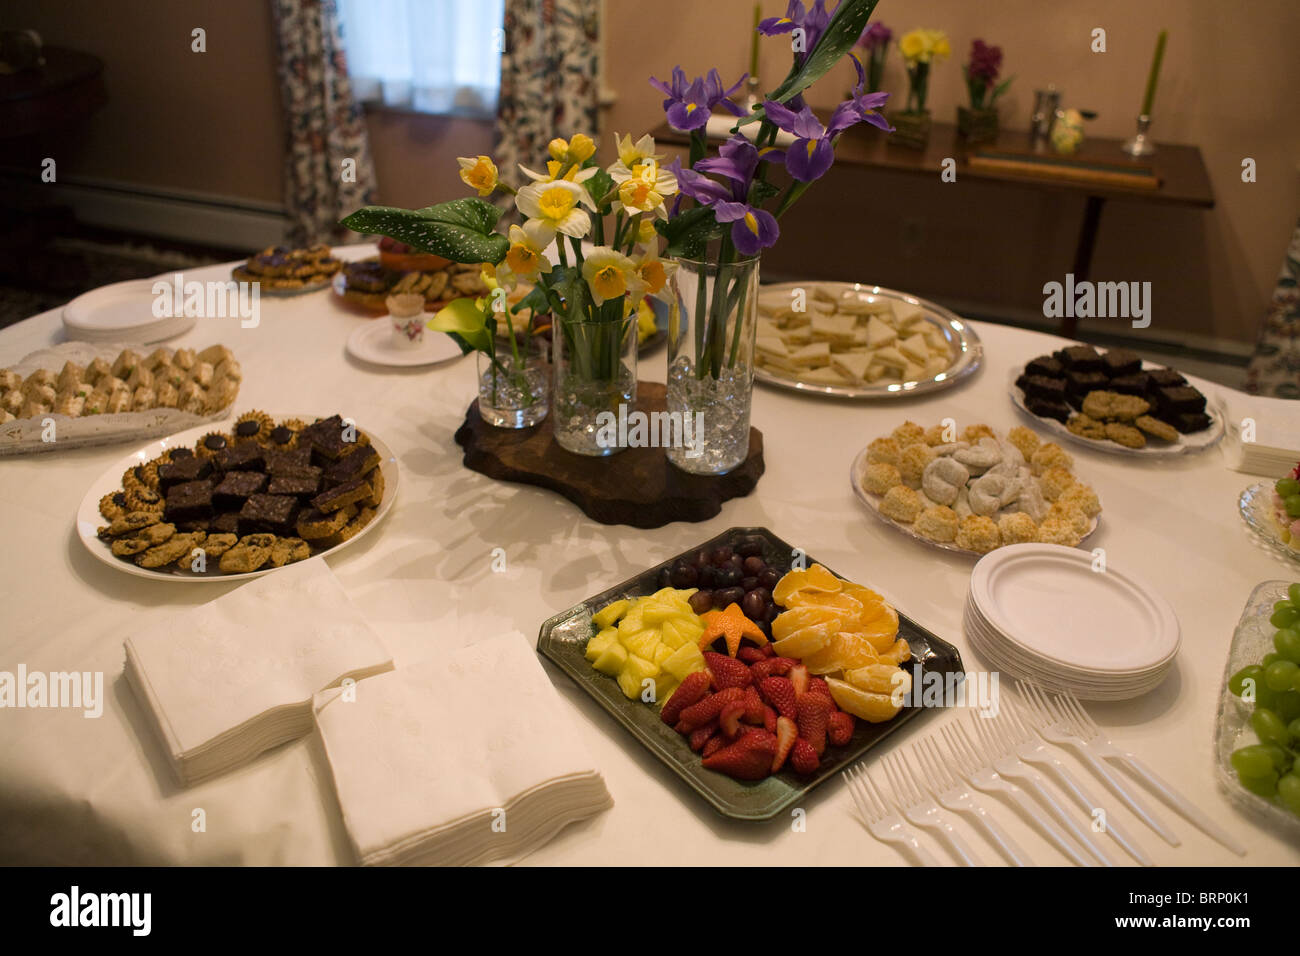 Ladies' tea table set with flowers, fruit, sandwiches, and cookies Stock Photo